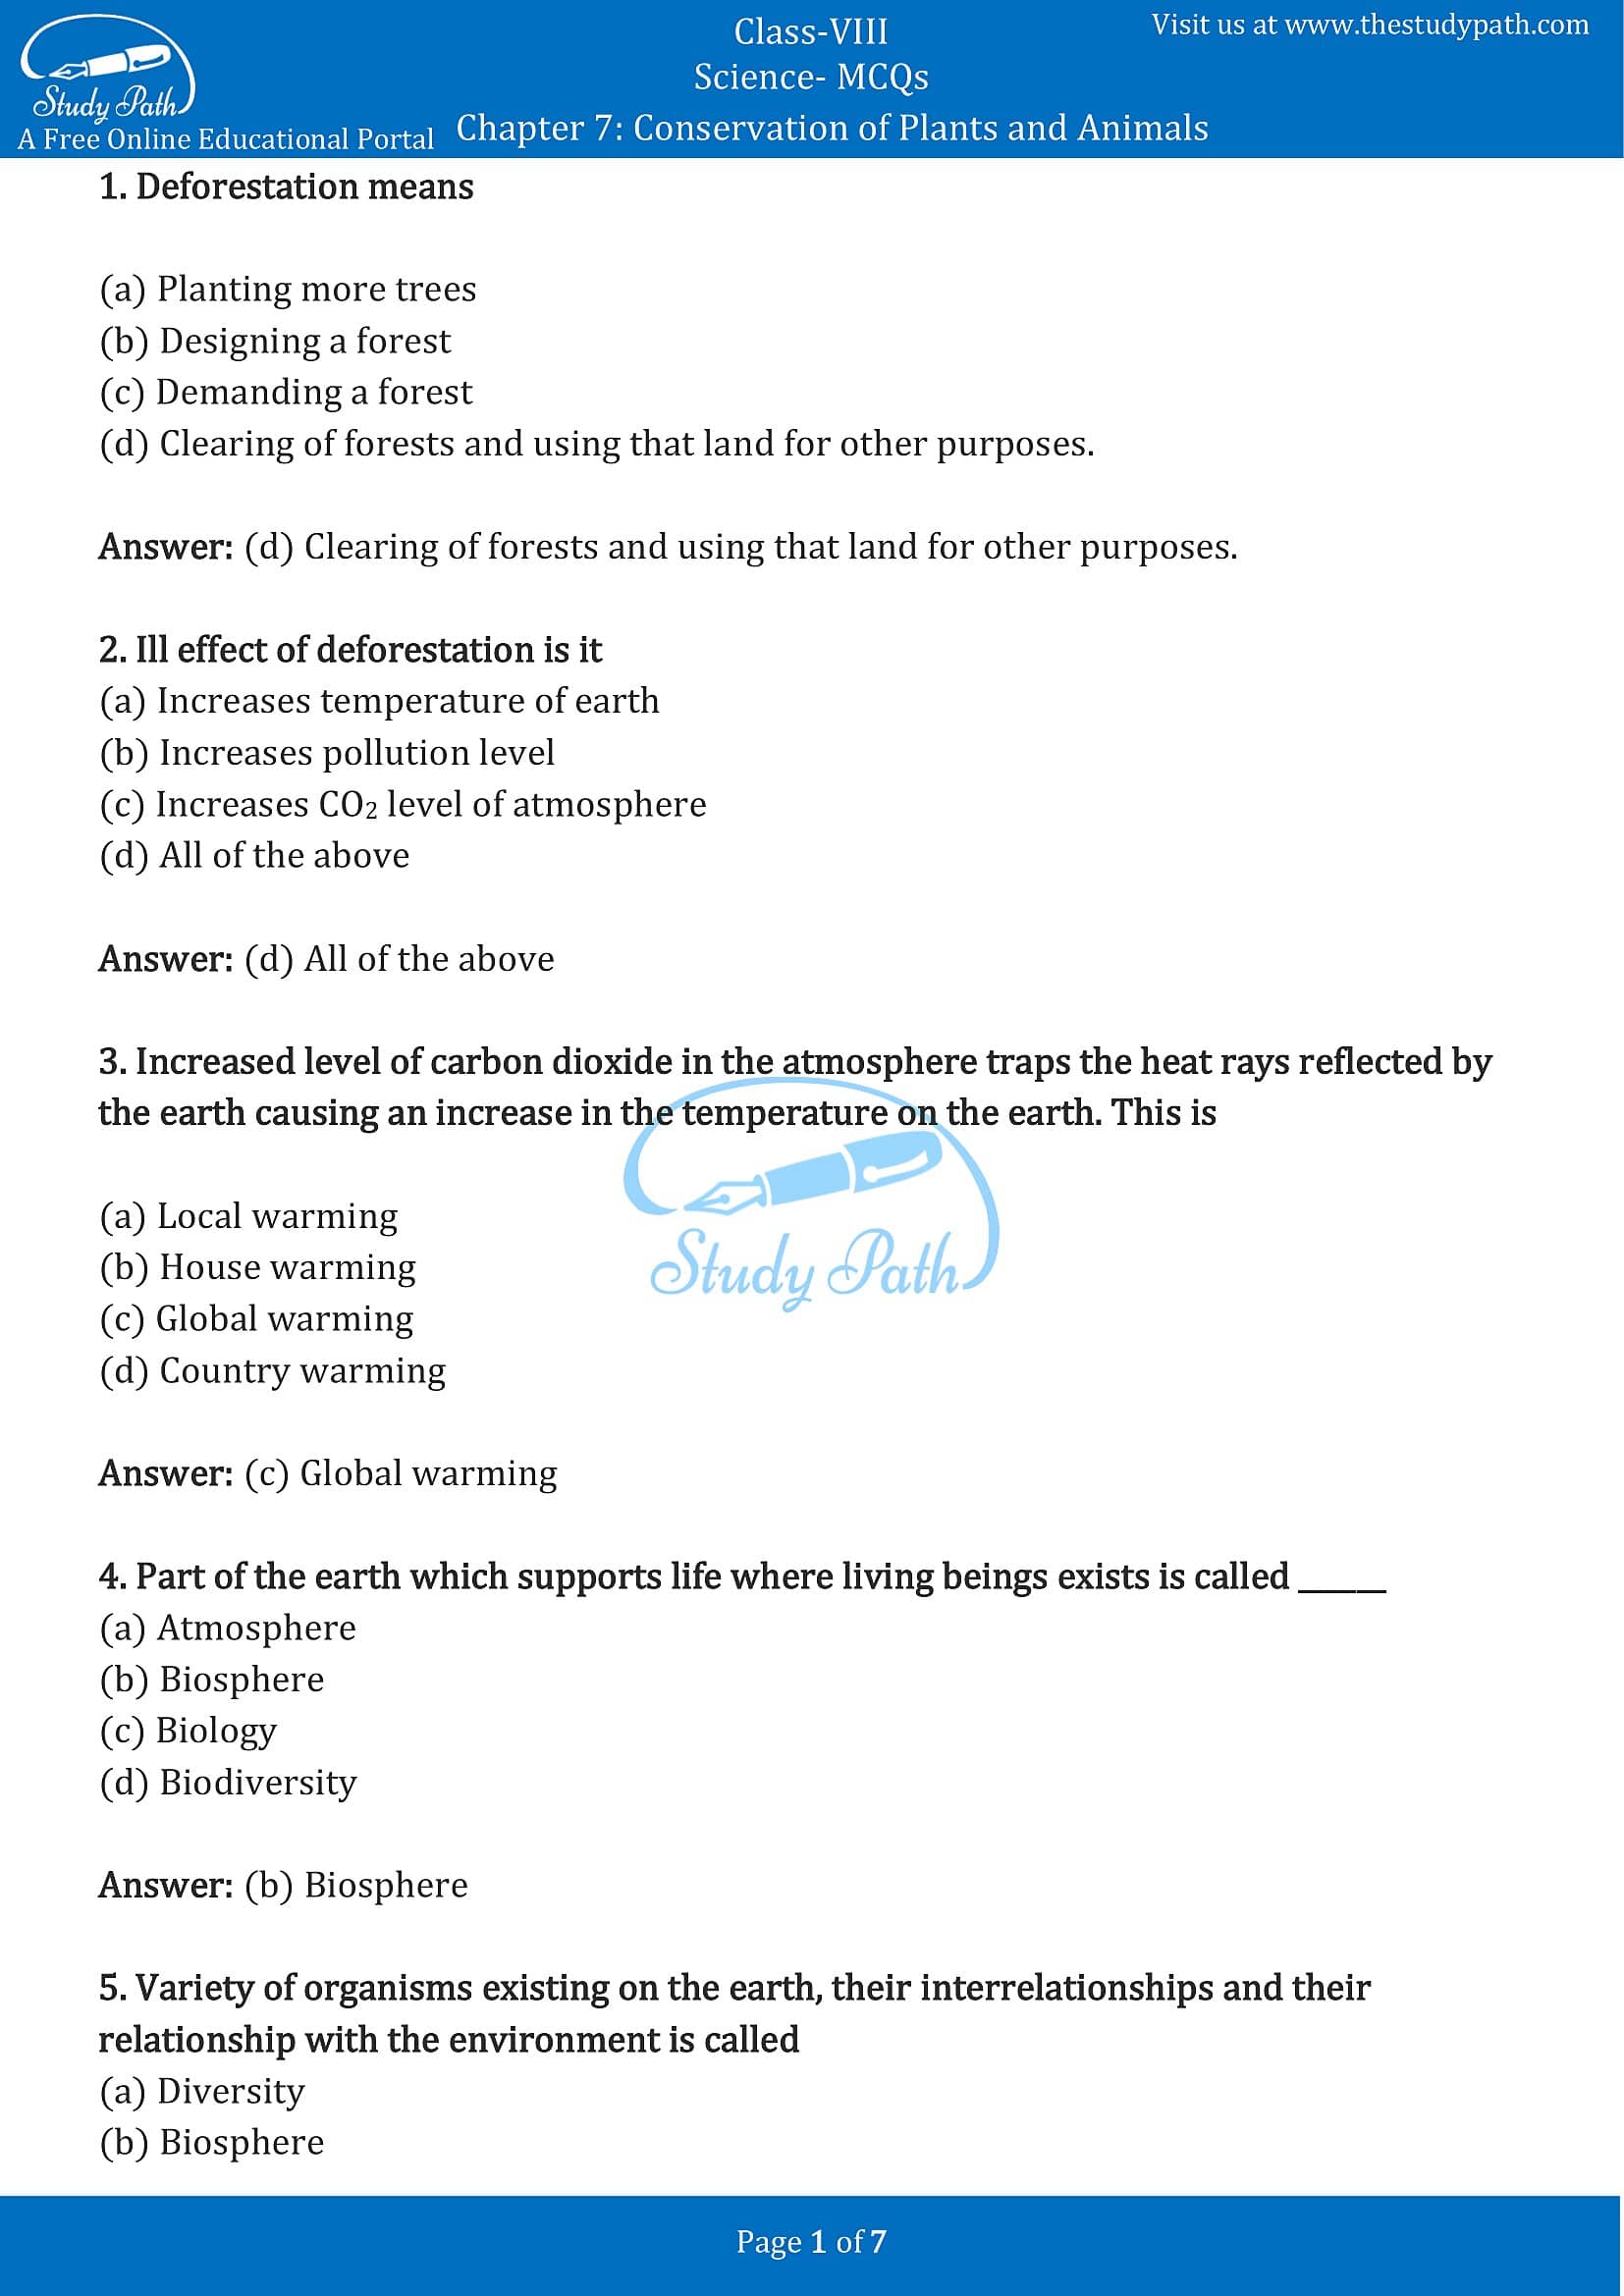 case study questions class 8 science chapter 7